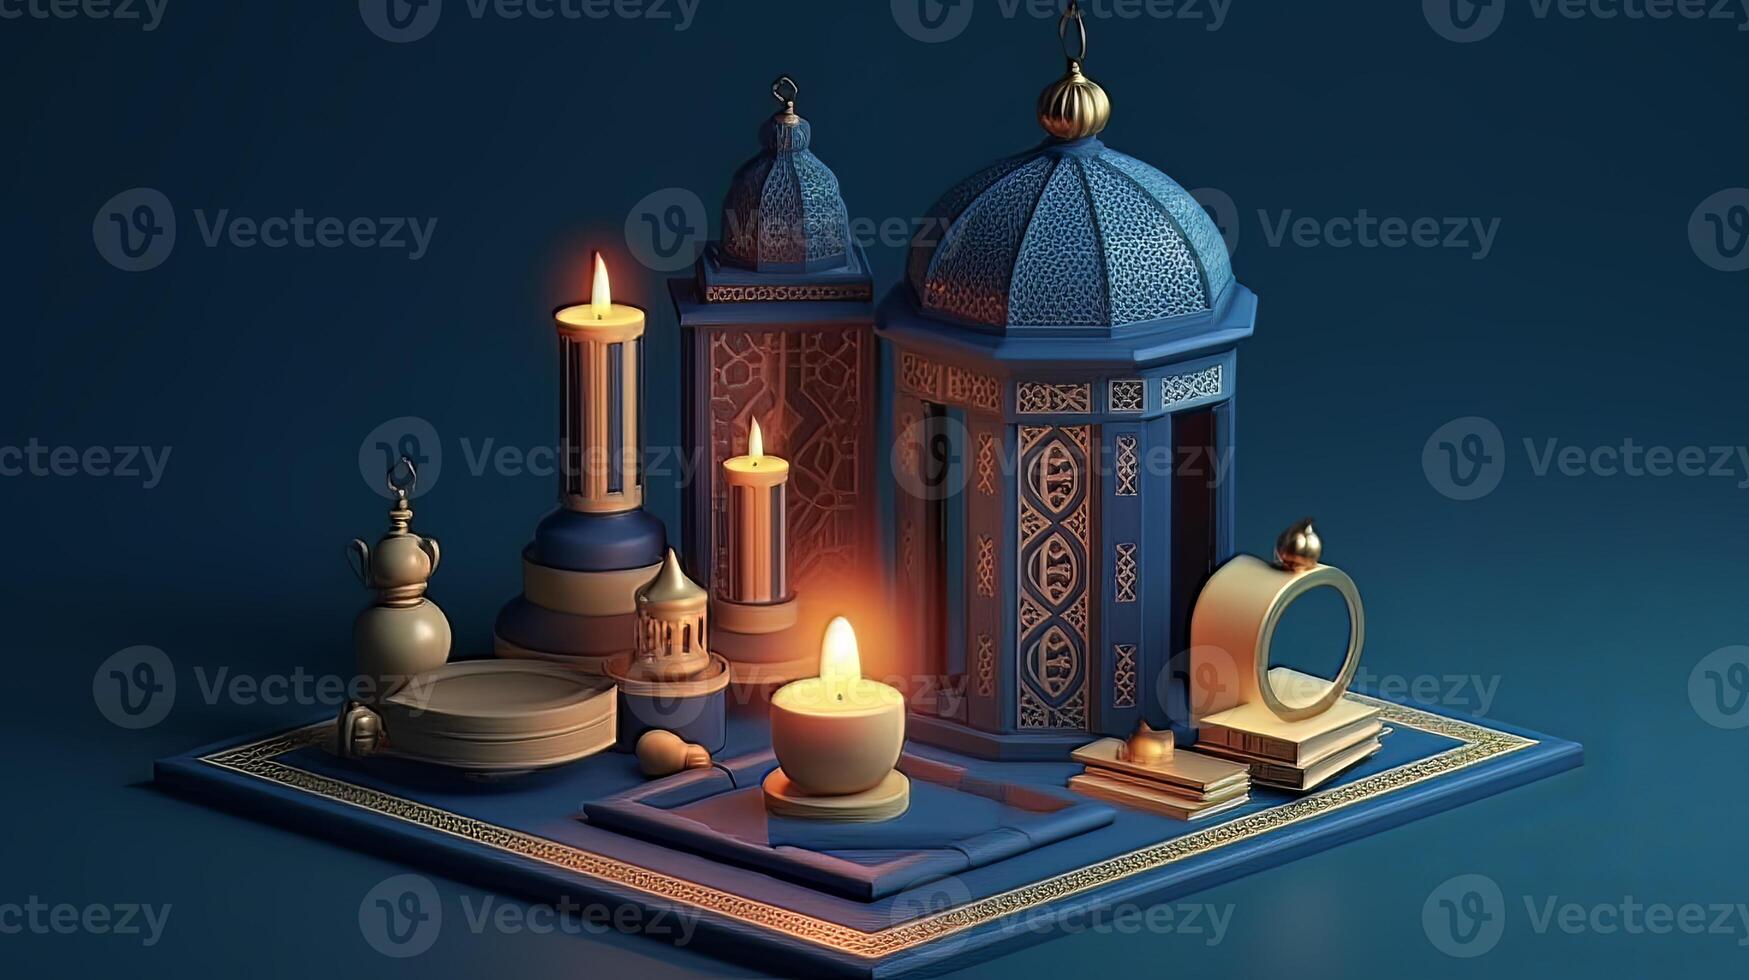 Ramadan The ninth month of Islamic calendar Observed by Muslims around world as A month of fasting prayer repercussions society Month commemorating first verses of Prophet Muhammad art photo